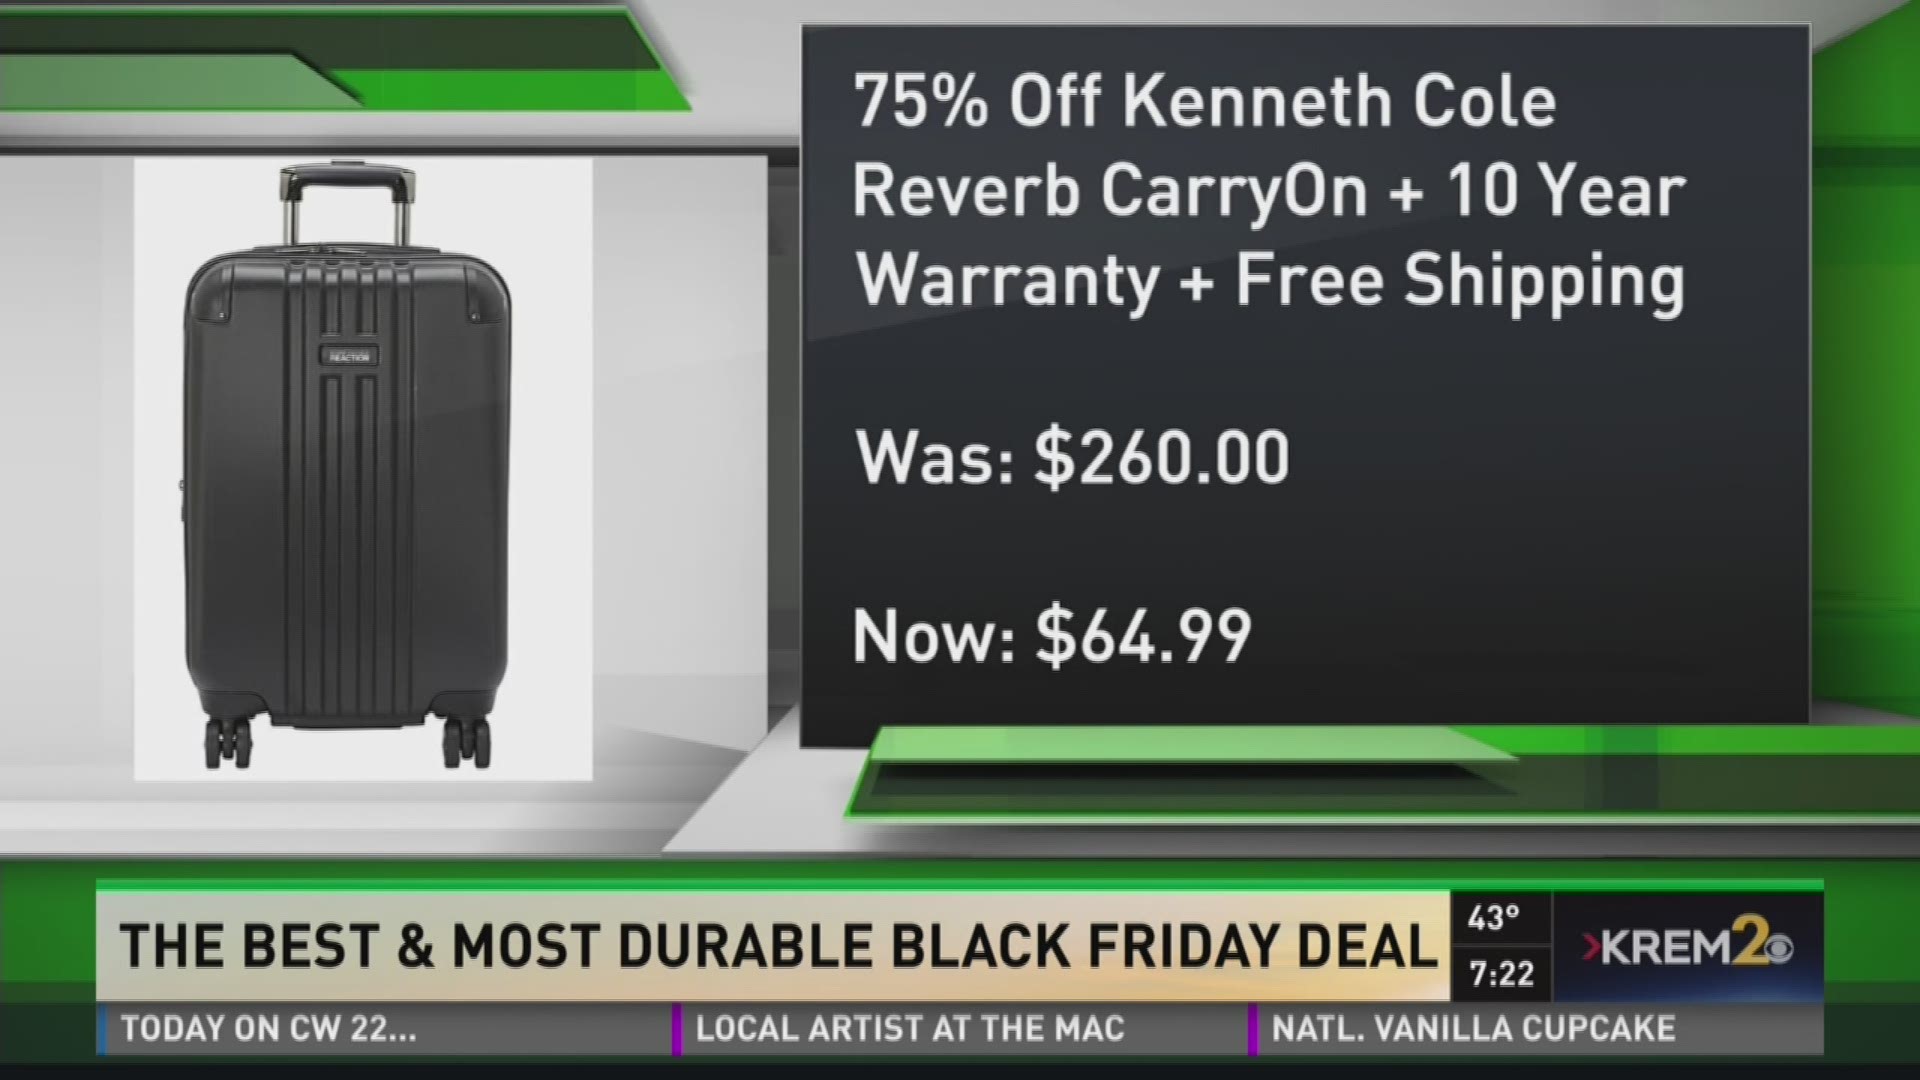 The best and most durable Black Friday deal